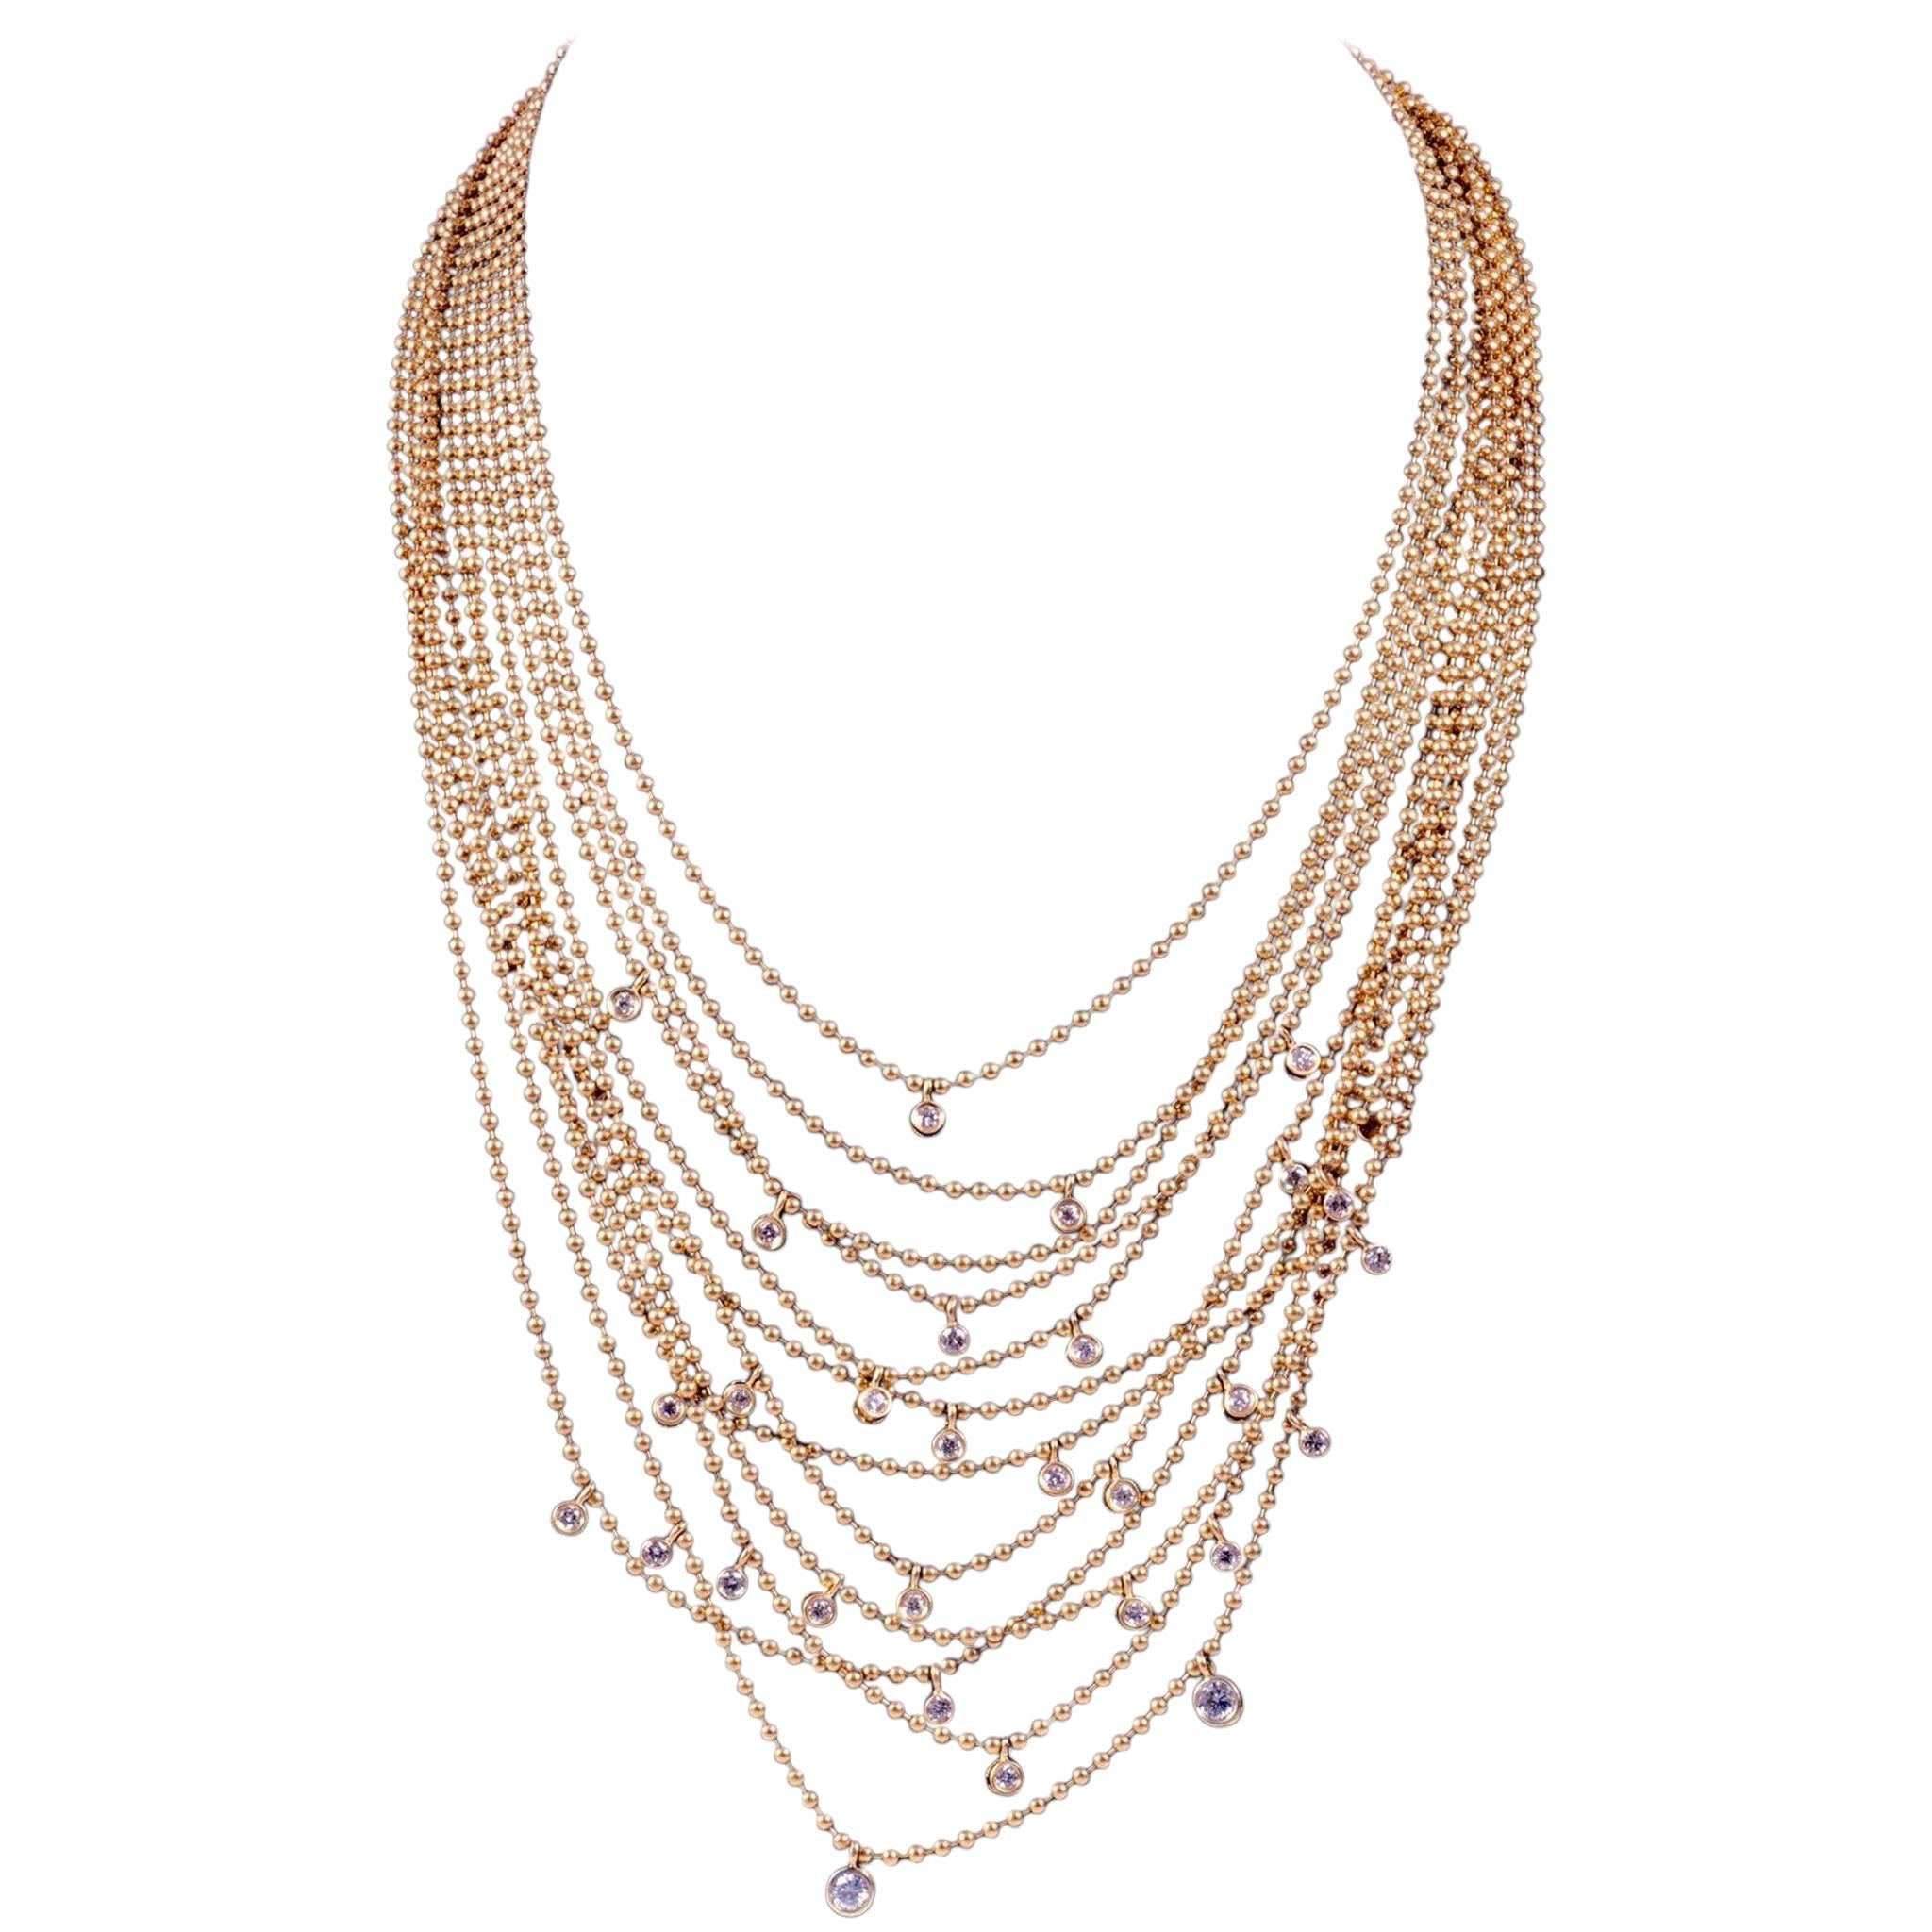 Draping Gold and Diamond Necklace